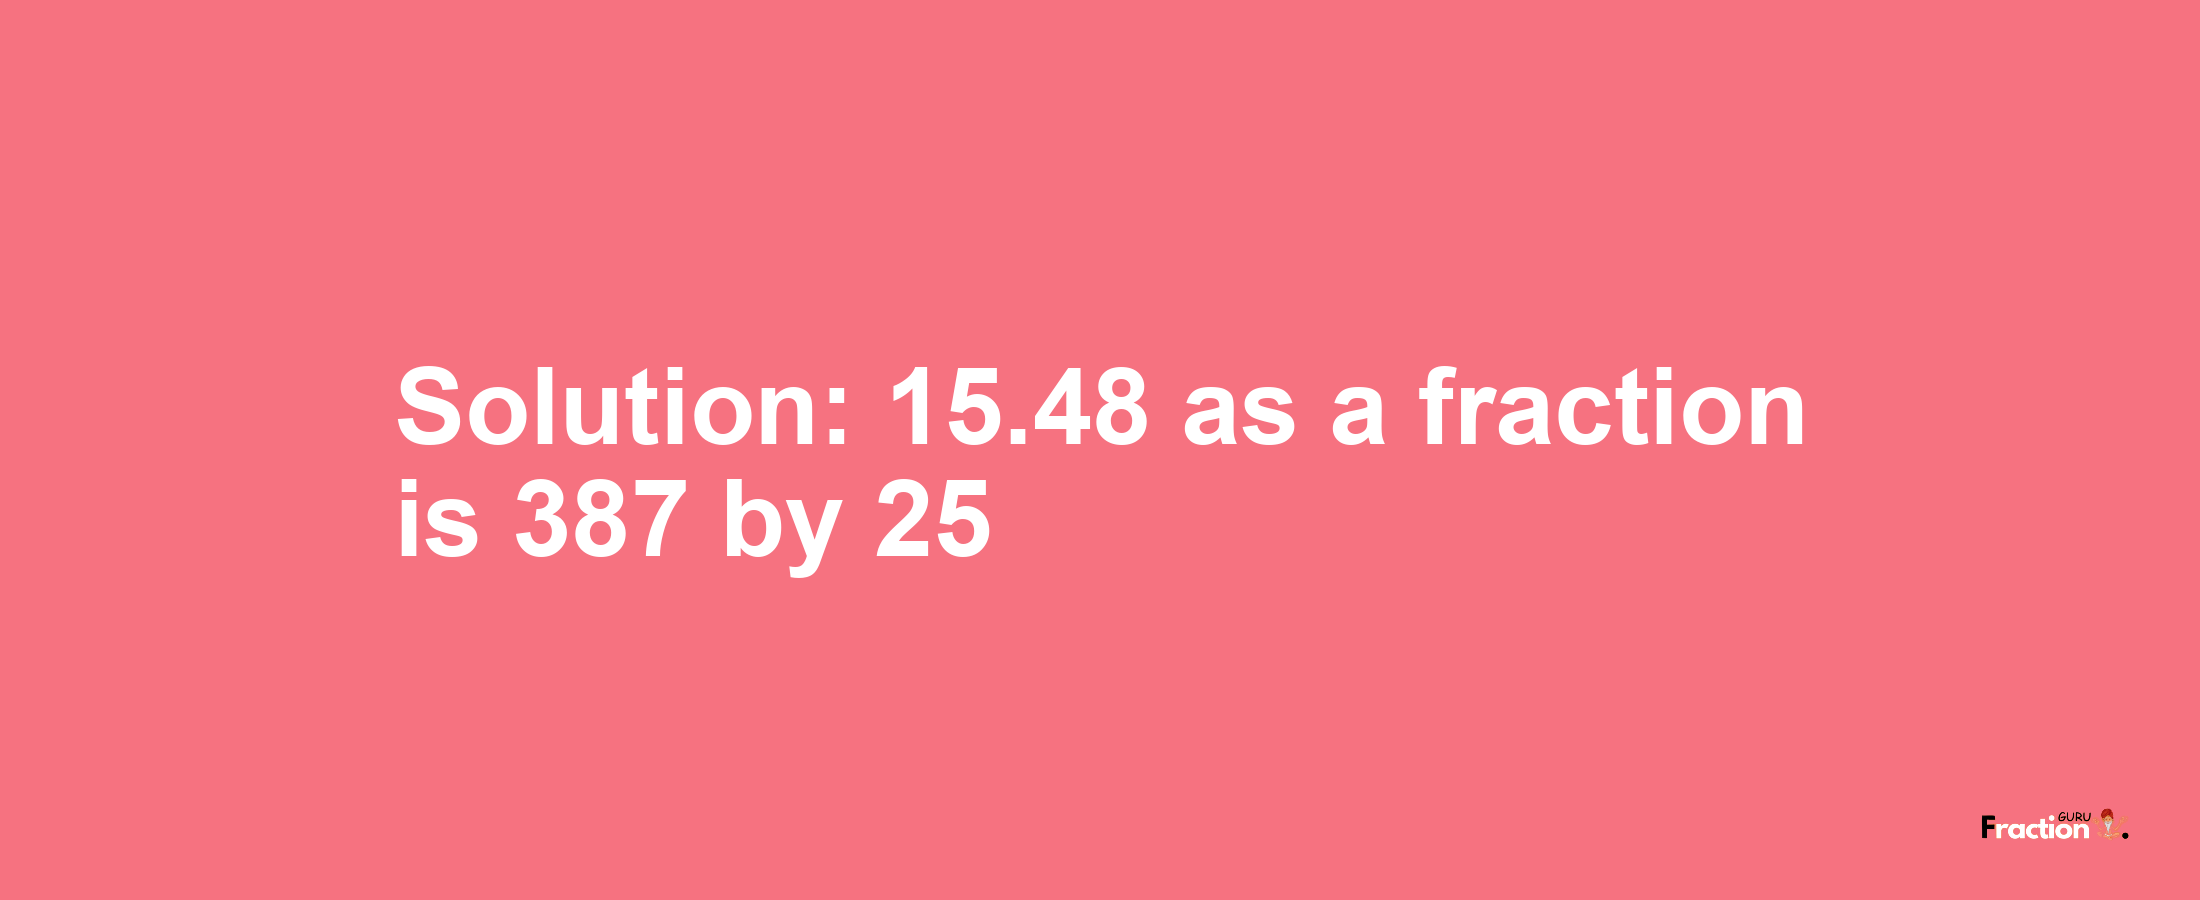 Solution:15.48 as a fraction is 387/25